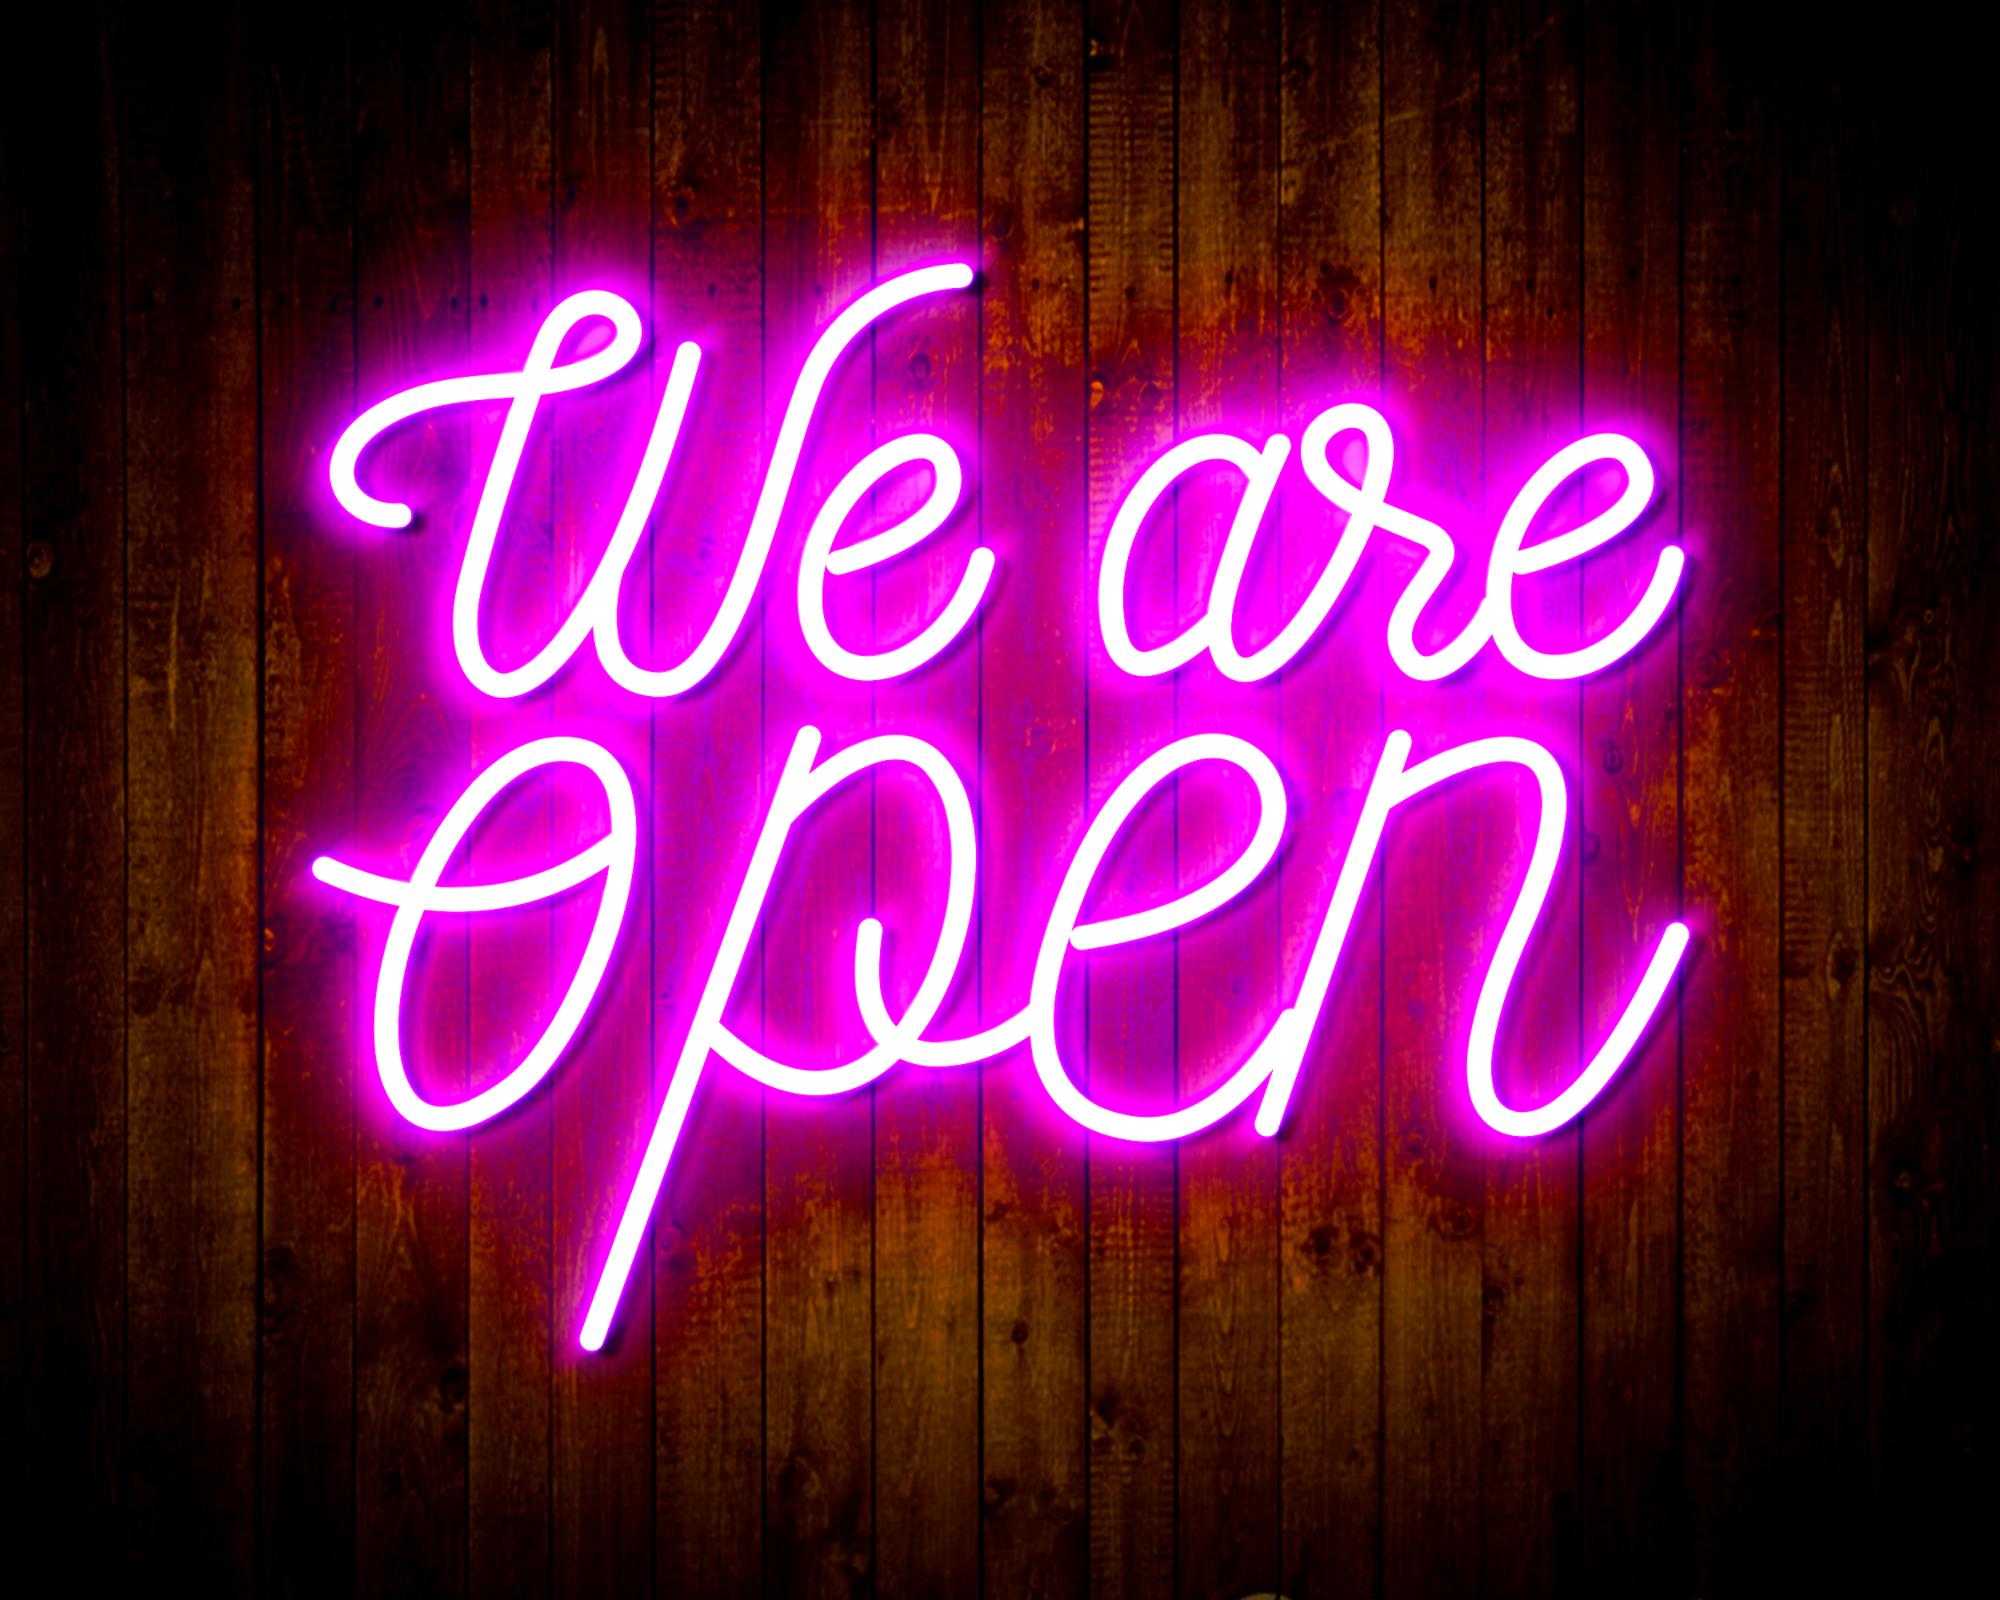 We 're Open LED Neon Sign Wall Light